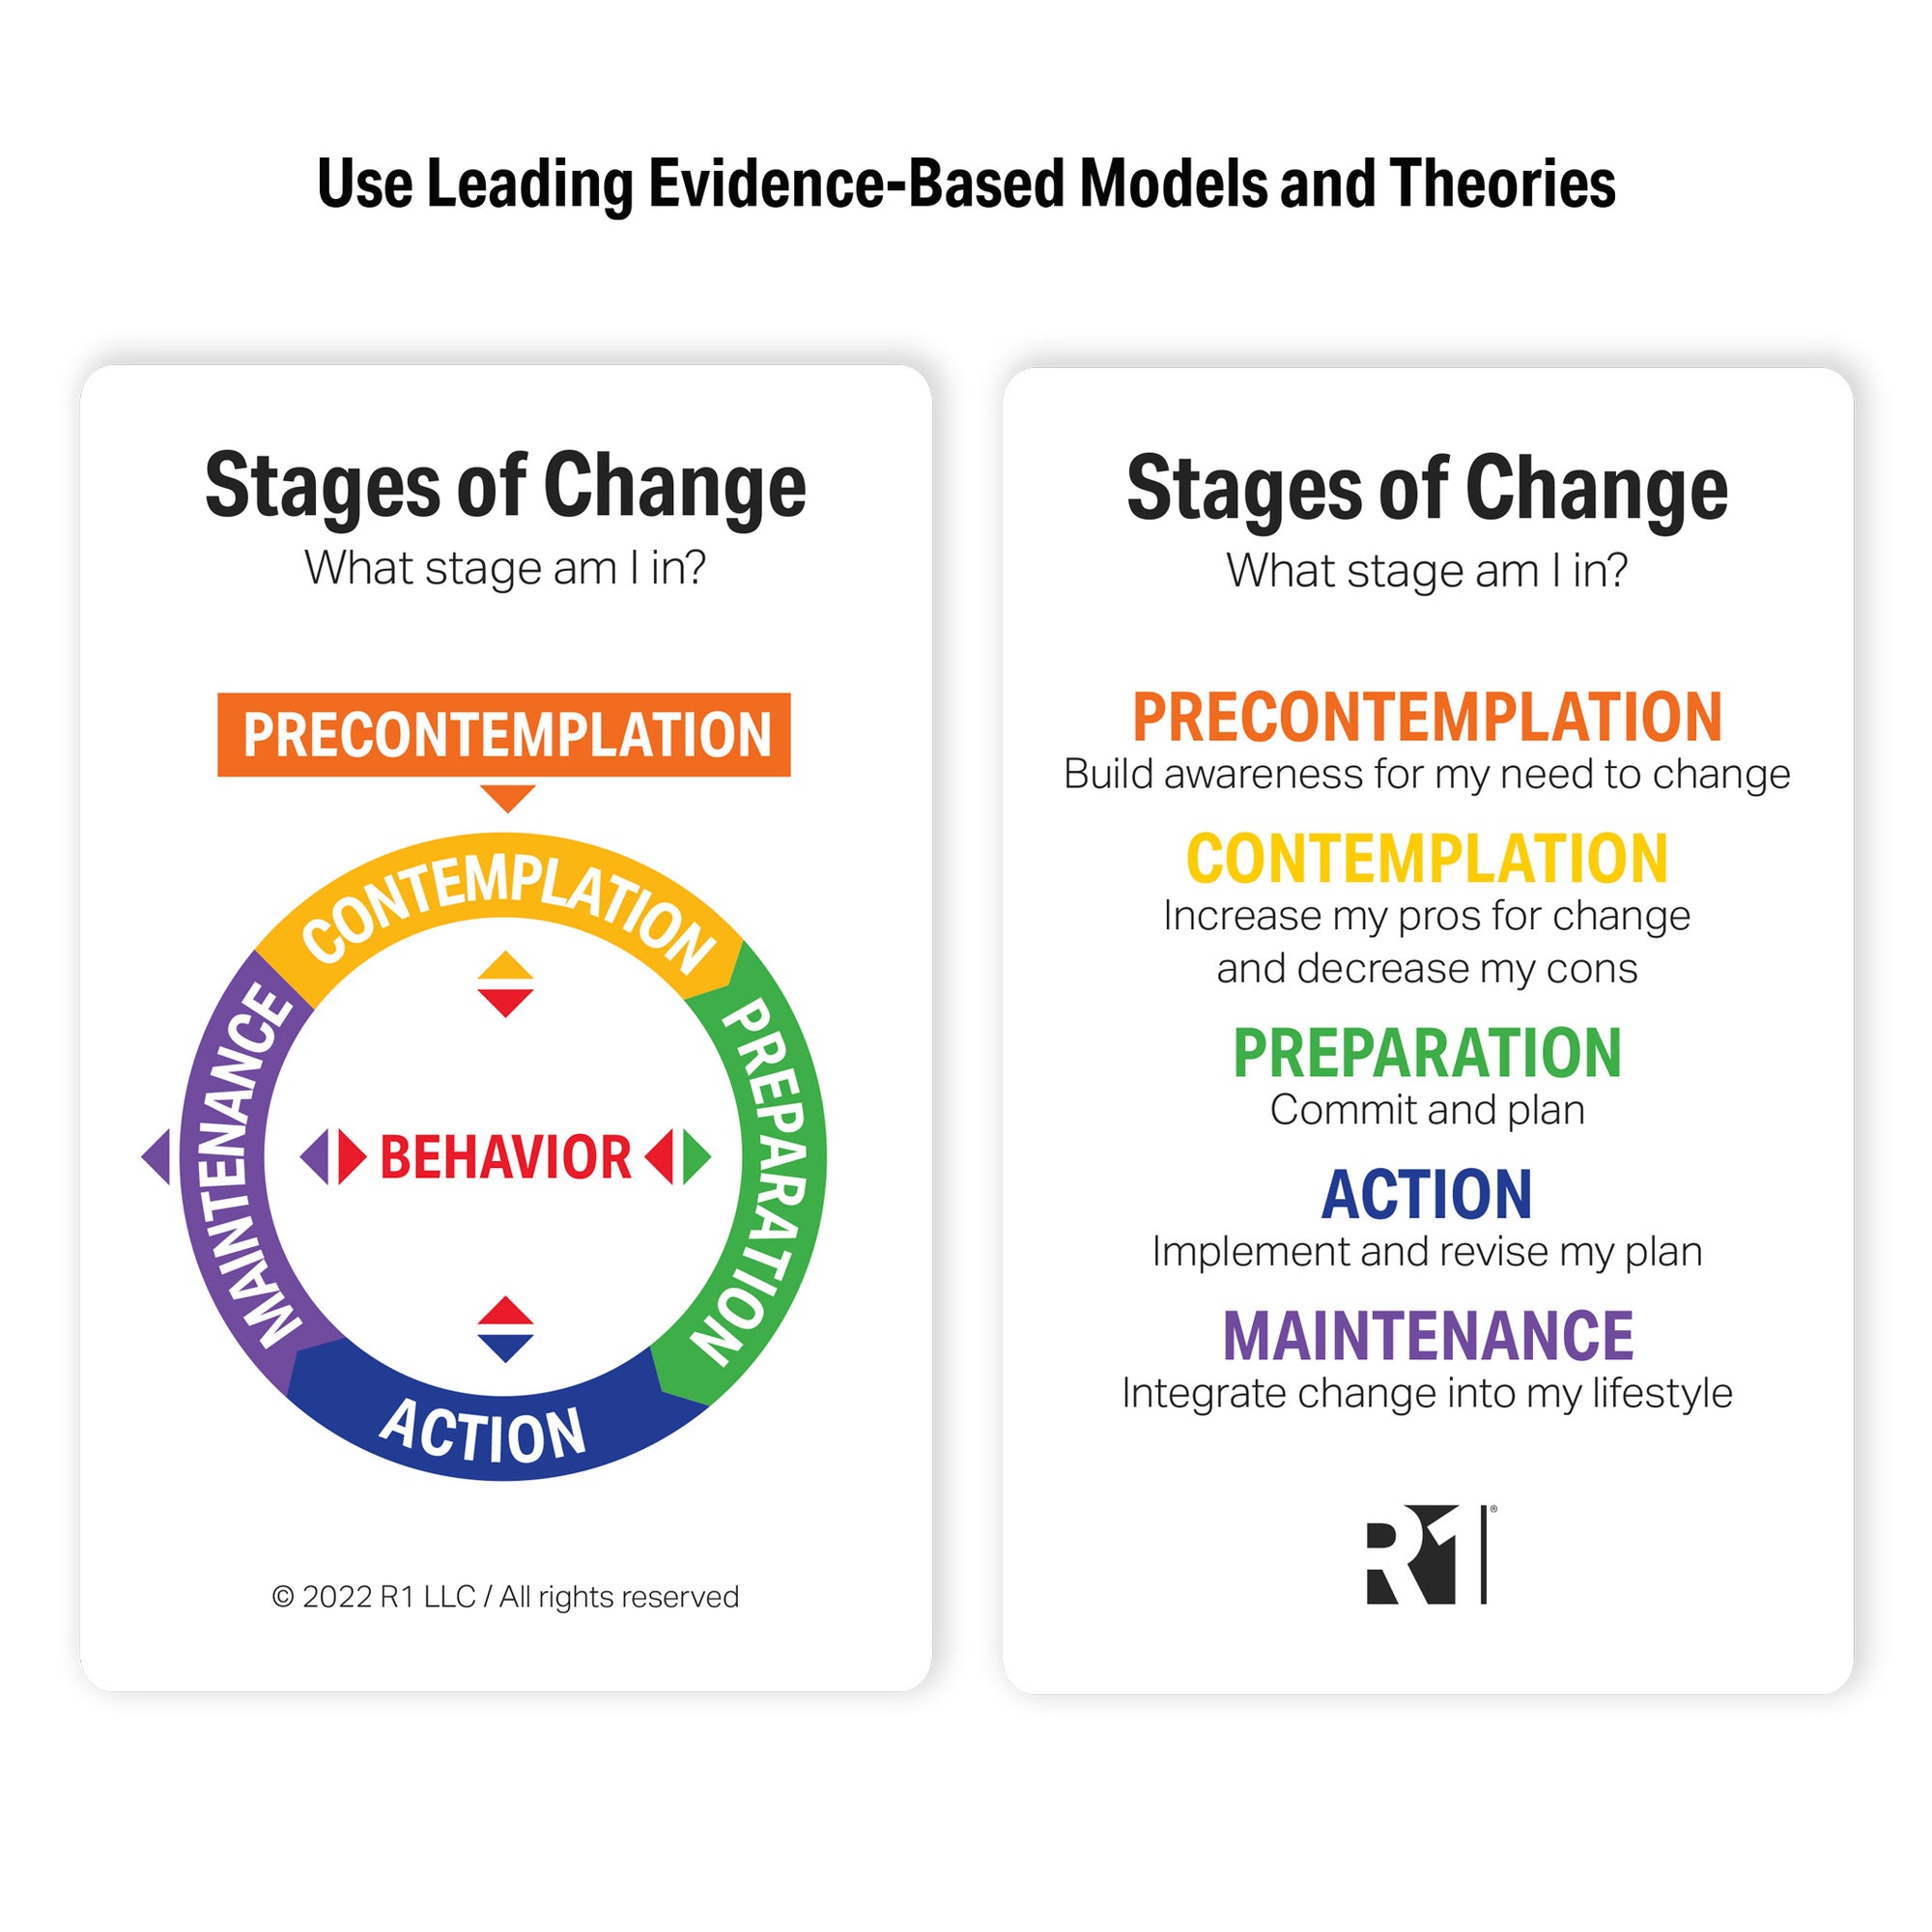 Stages of Change (START) Facilitator Guide